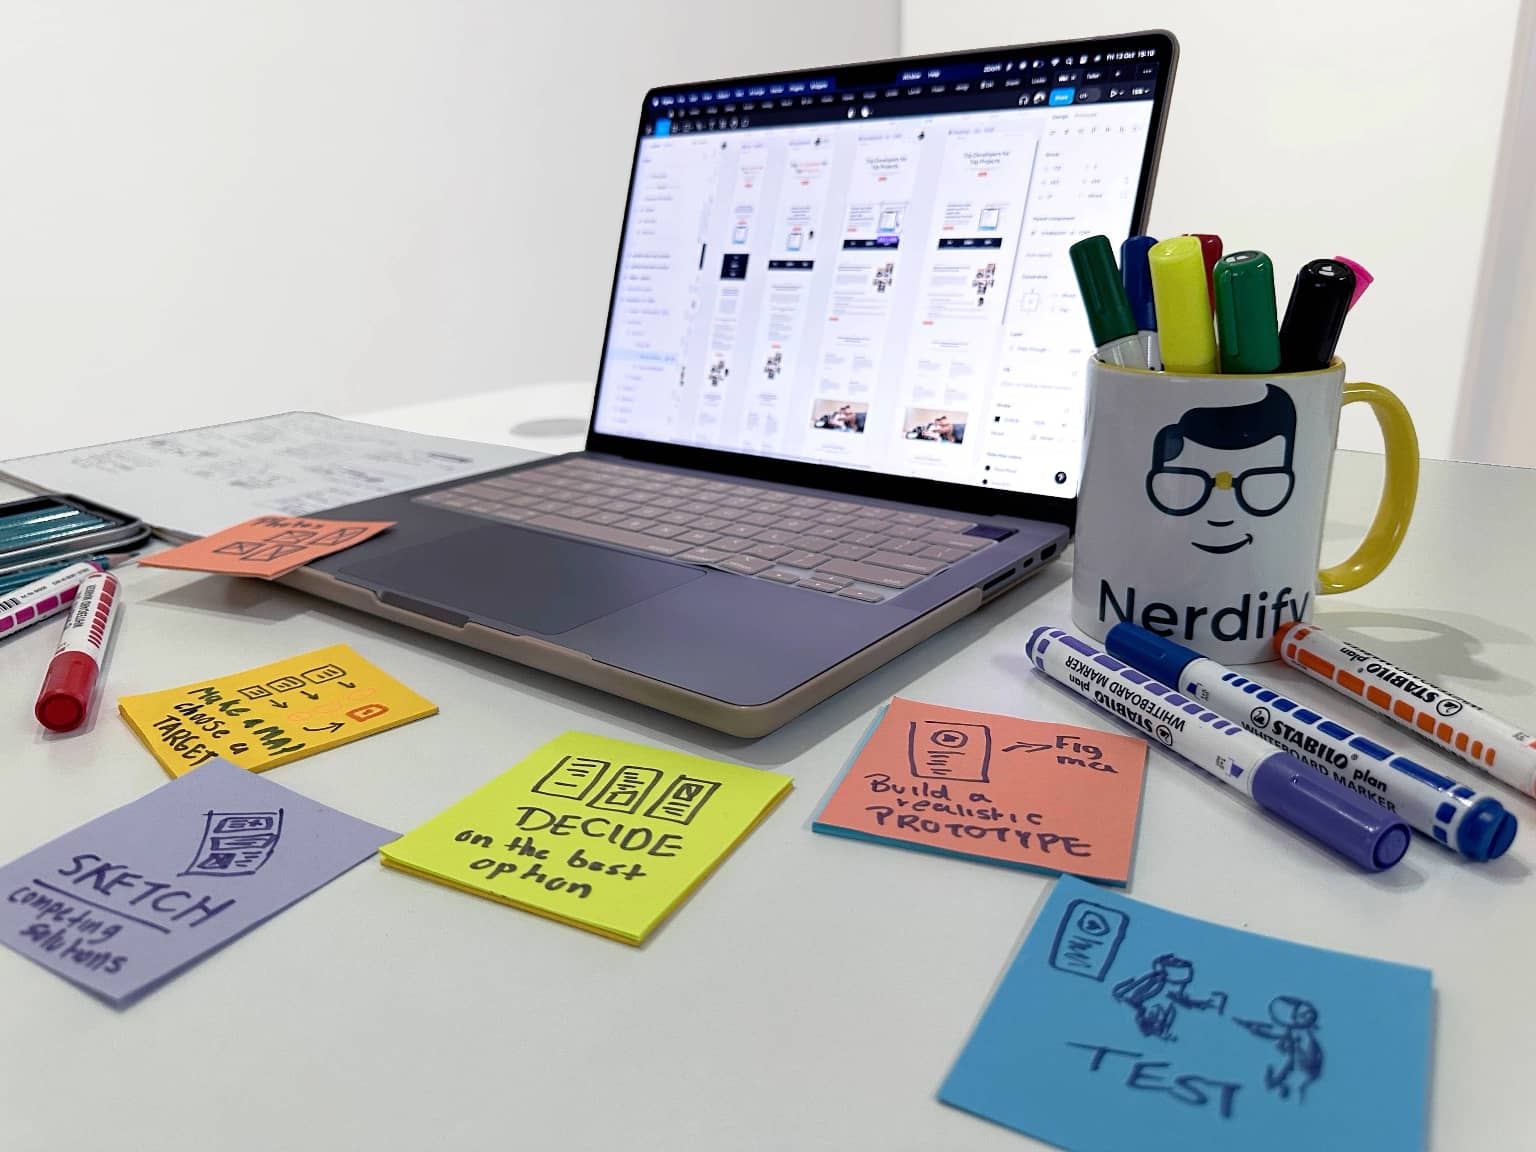 UX}/UI designer focused on the development of the design of a website at Nerdify using the Figma tool